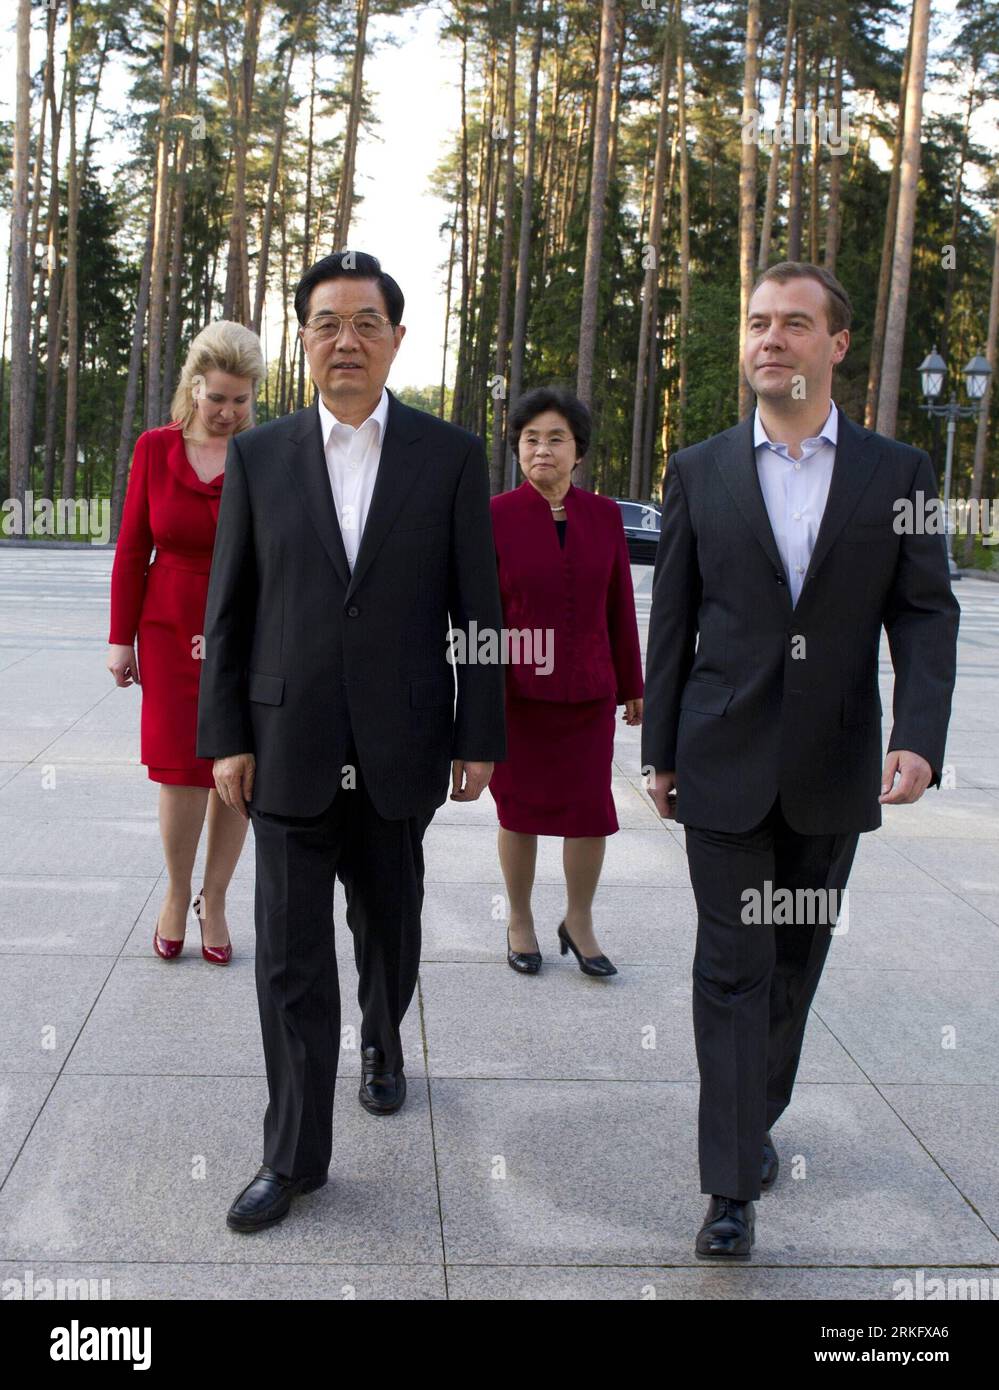 Bildnummer: 55464848  Datum: 17.06.2011  Copyright: imago/Xinhua (110616) -- MOSCOW, June 16, 2011 (Xinhua) -- Visiting Chinese President Hu Jintao (L, Front) and his wife Liu Yongqing (R, Back) visit Russian presidential residence, accompanied by Russian President Dmitry Medvedev (R, Front) and his wife Svetlana Medvedeva (L, Back), outside Moscow, Russia, June 16, 2011. (Xinhua/Li Xueren) (zn) RUSSIA-CHINA-HU JINTAO-DMITRY MEDVEDEV-DINNER (CN) PUBLICATIONxNOTxINxCHN People Politik Staatsbesuch xcb x0x 2011 hoch premiumd     Bildnummer 55464848 Date 17 06 2011 Copyright Imago XINHUA  Moscow J Stock Photo